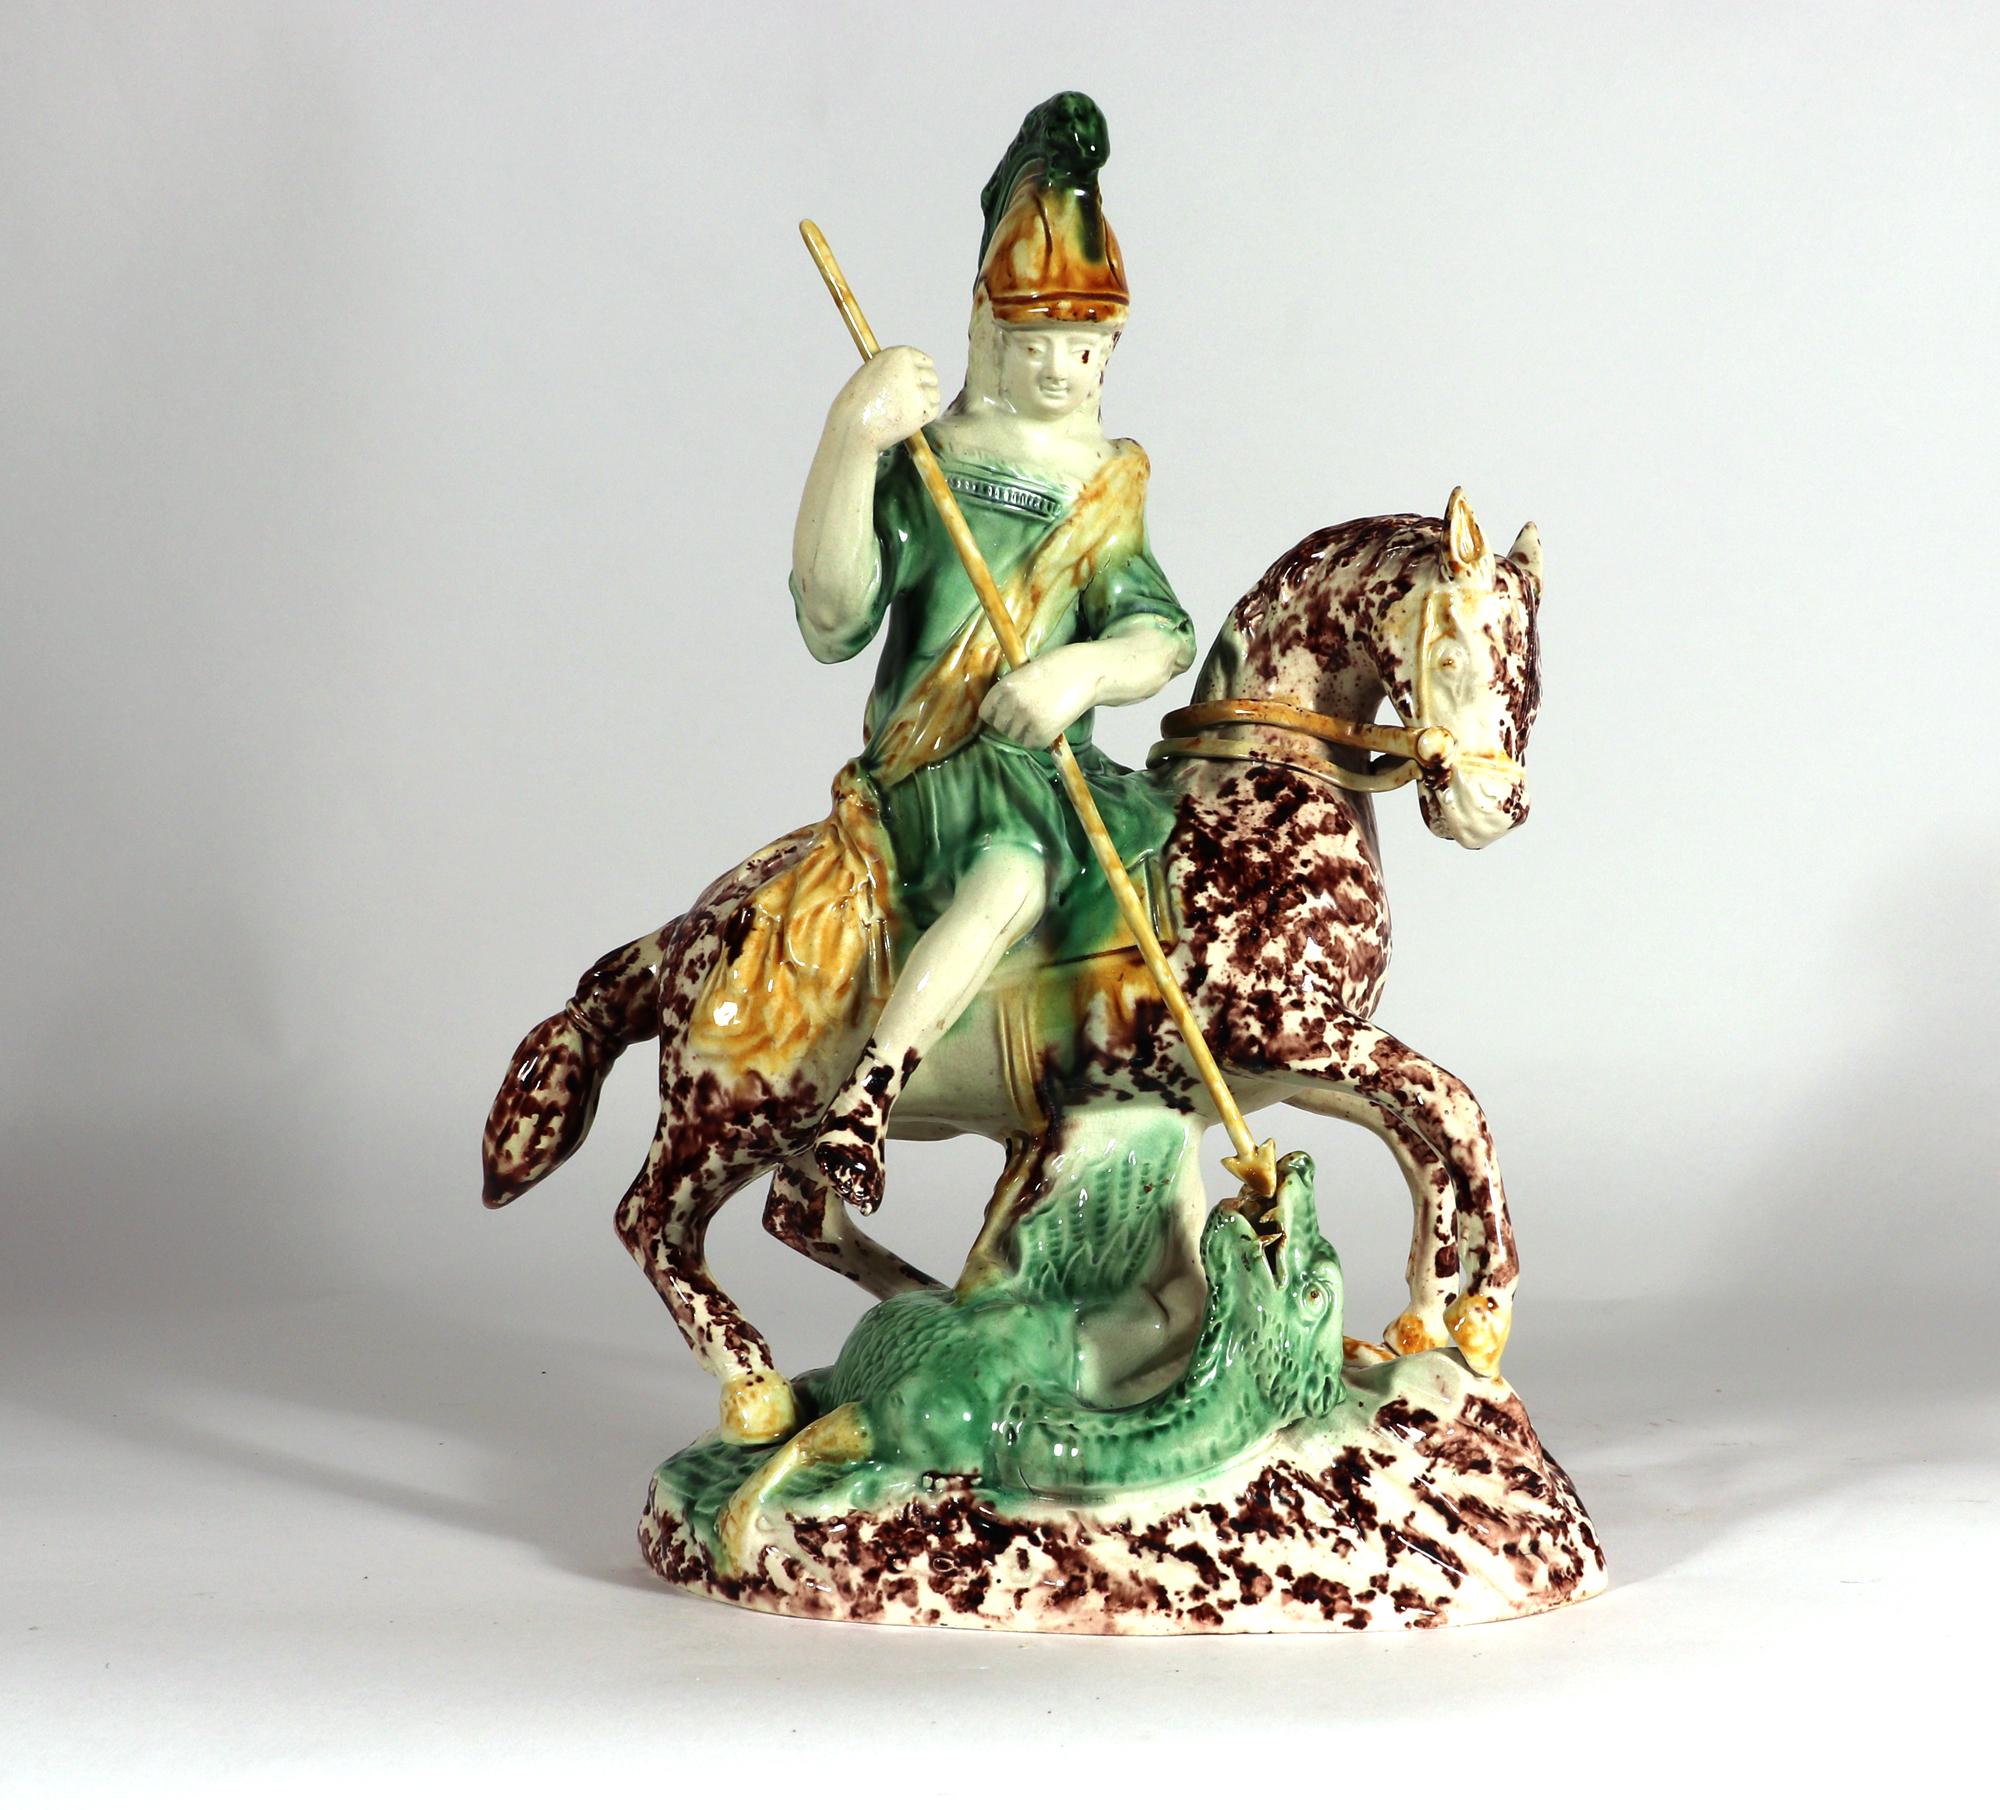 English Pottery Lead-glazed Earthenware Figure of St. George and the Dragon 6